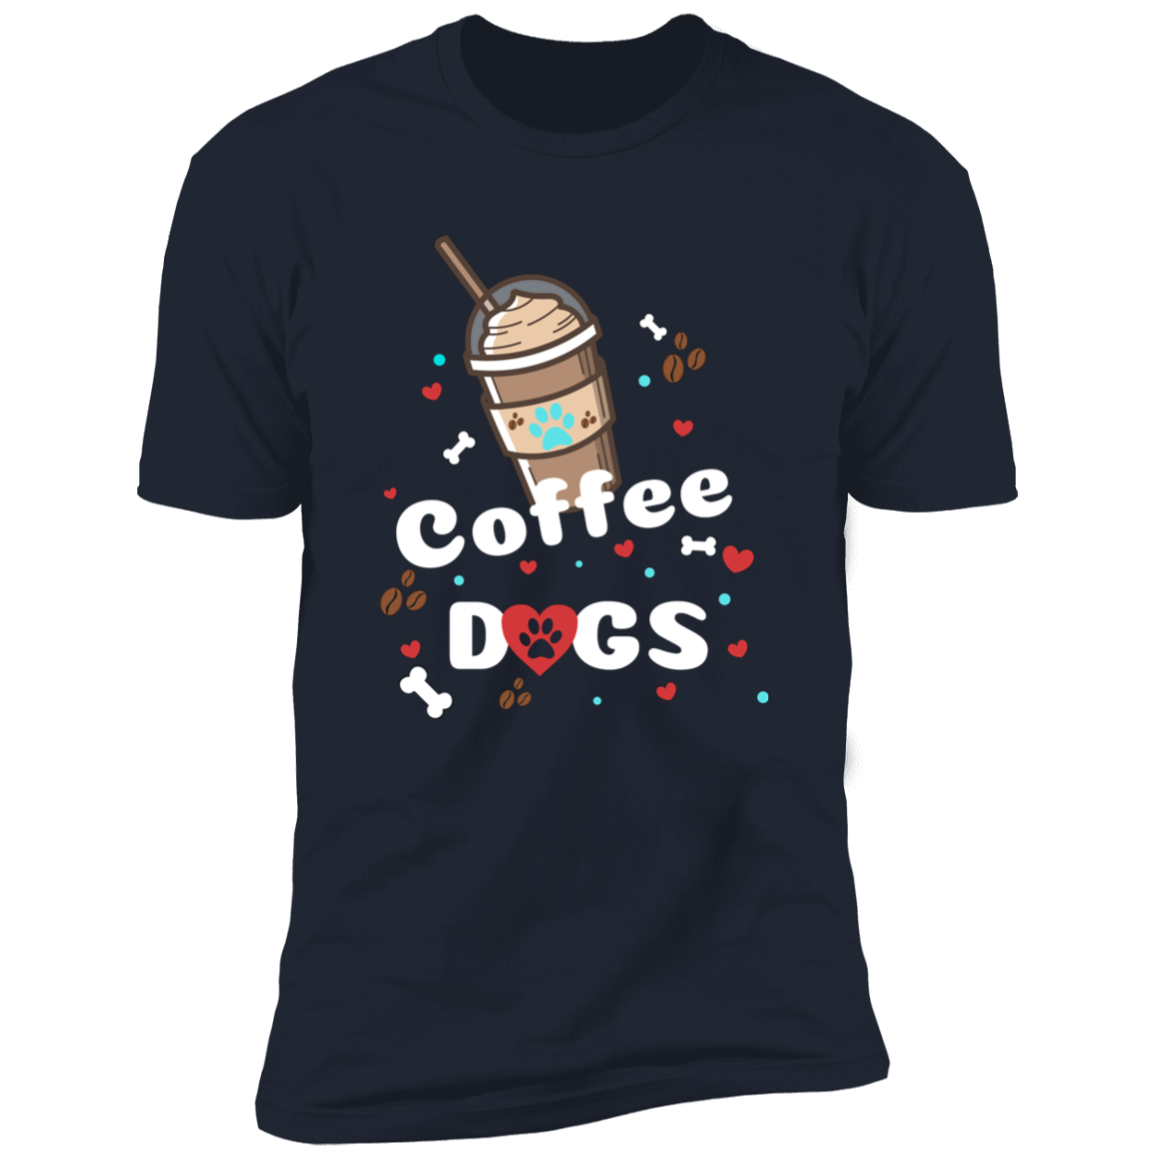 Blended Coffee Dogs T-shirt, Dog Shirt for humans, in navy blue